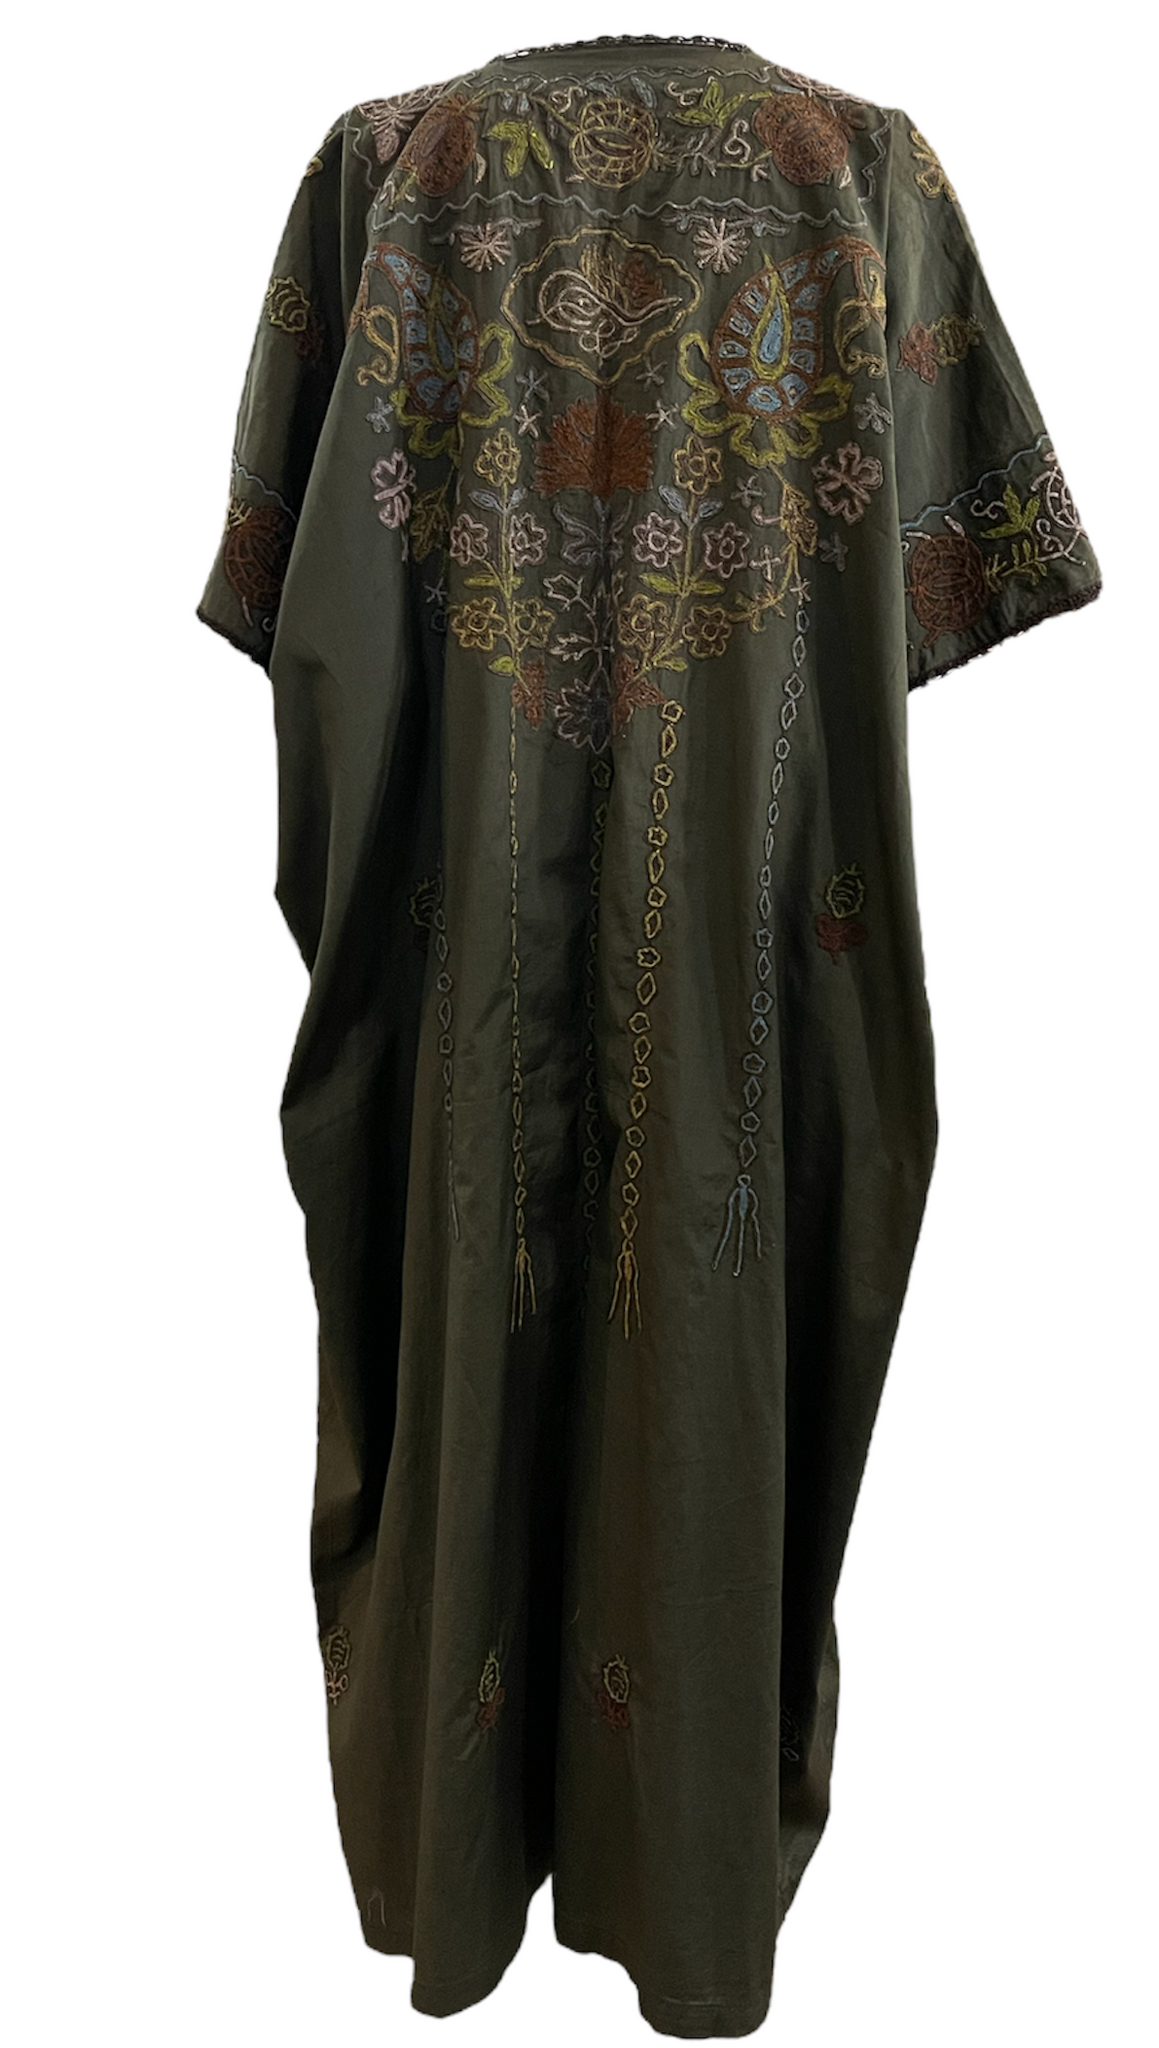  Ottoman Turkish Early 20th Century Embroidered Robe BACK 3 of 6